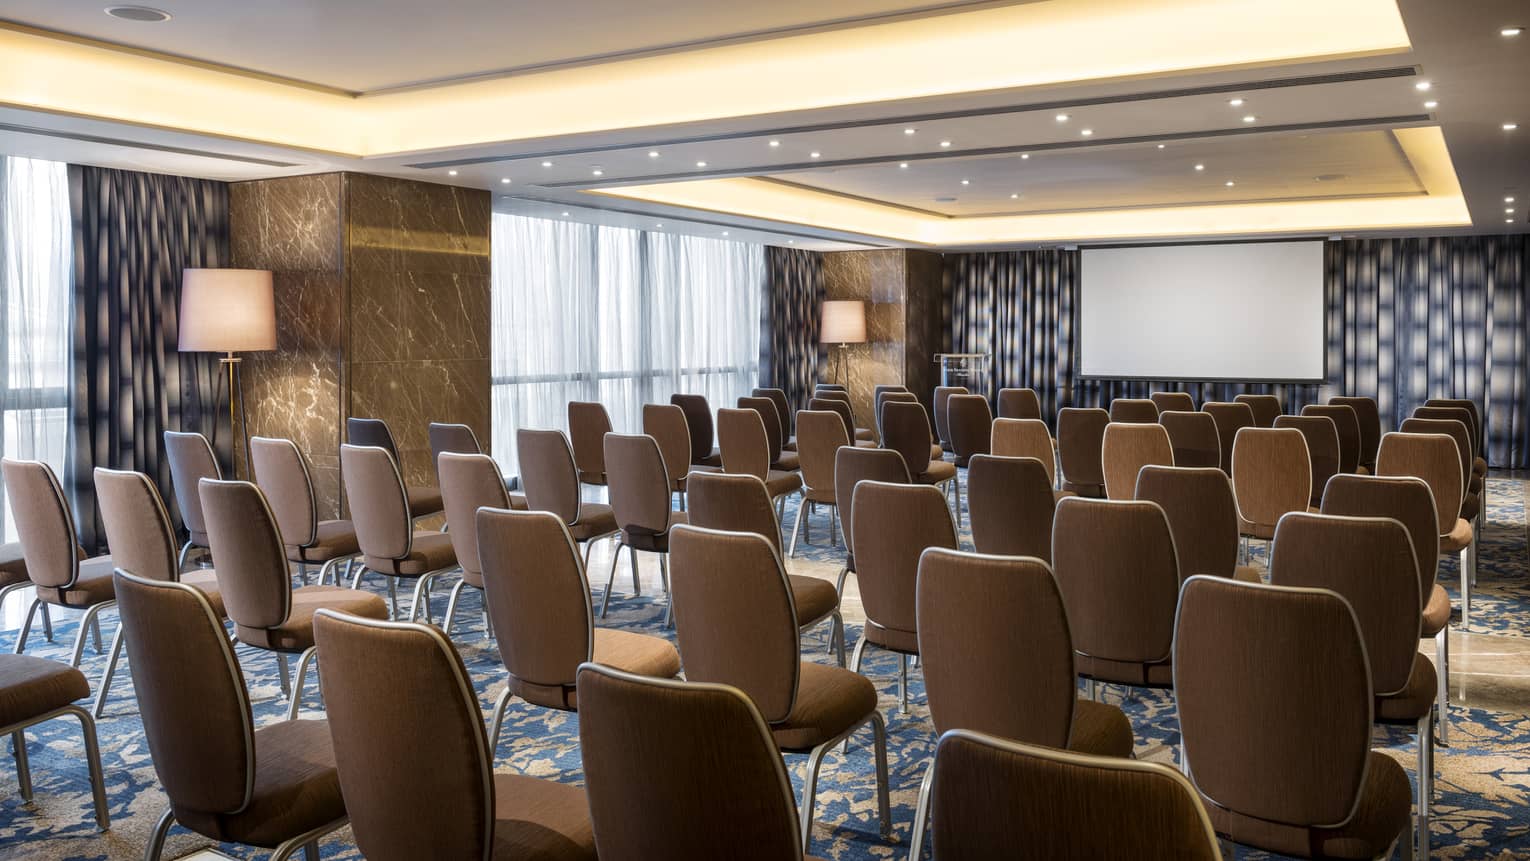 Rows of chairs facing screen in large meeting room with marble pillars